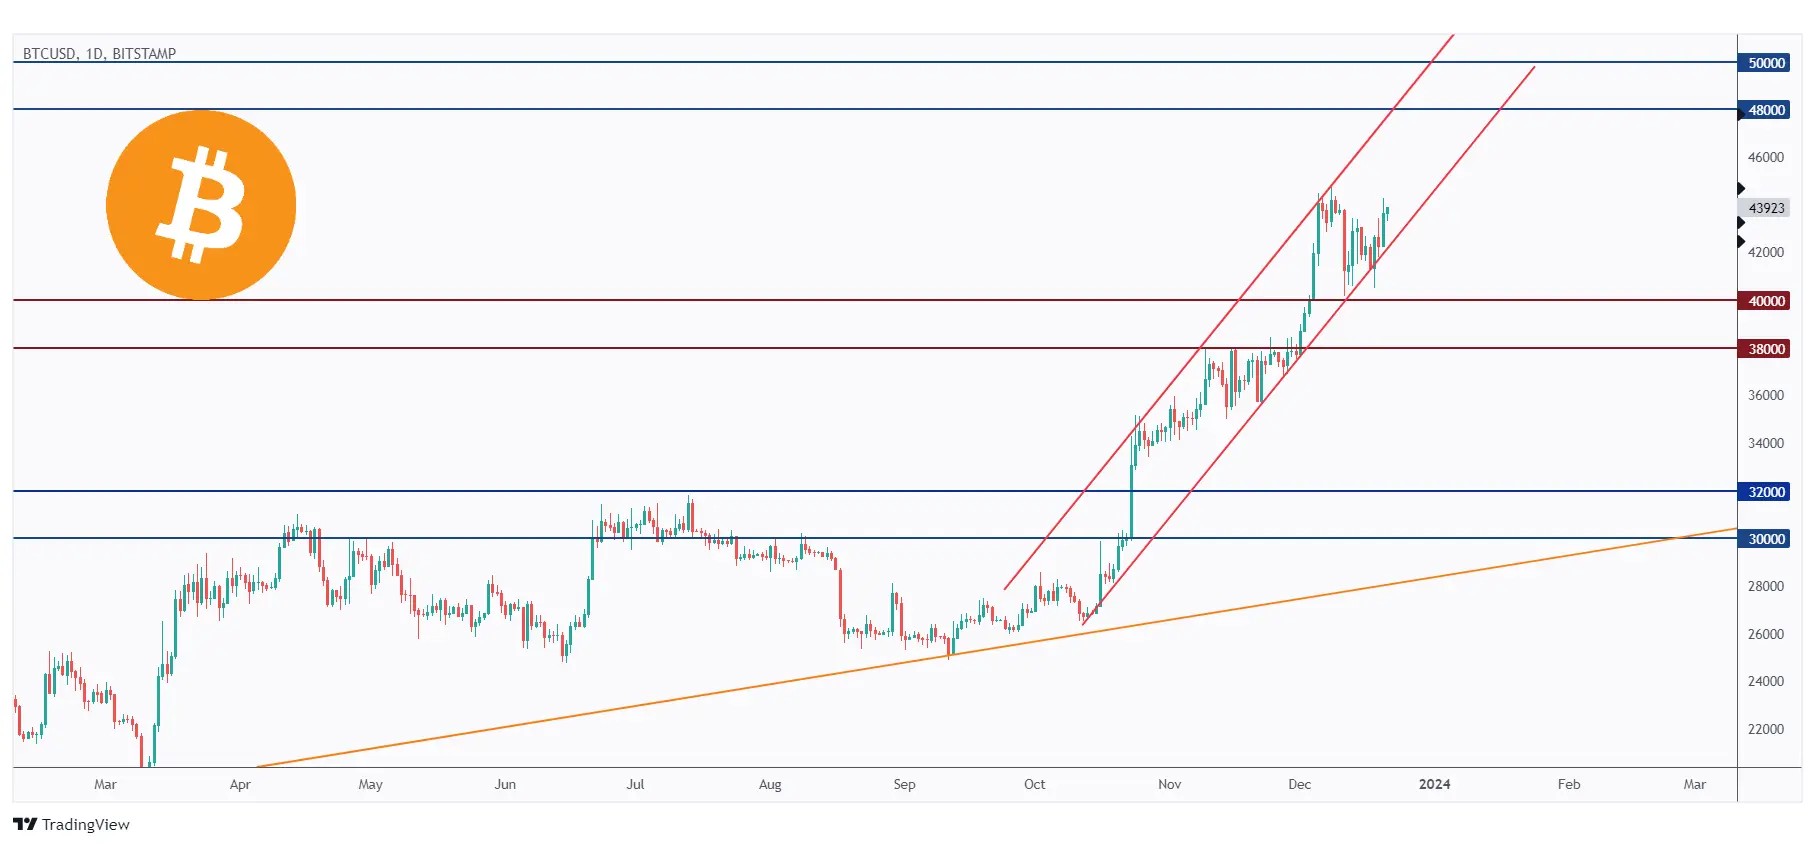 Bitcoin chart showing overall bullish momentum trading inside a rising channel